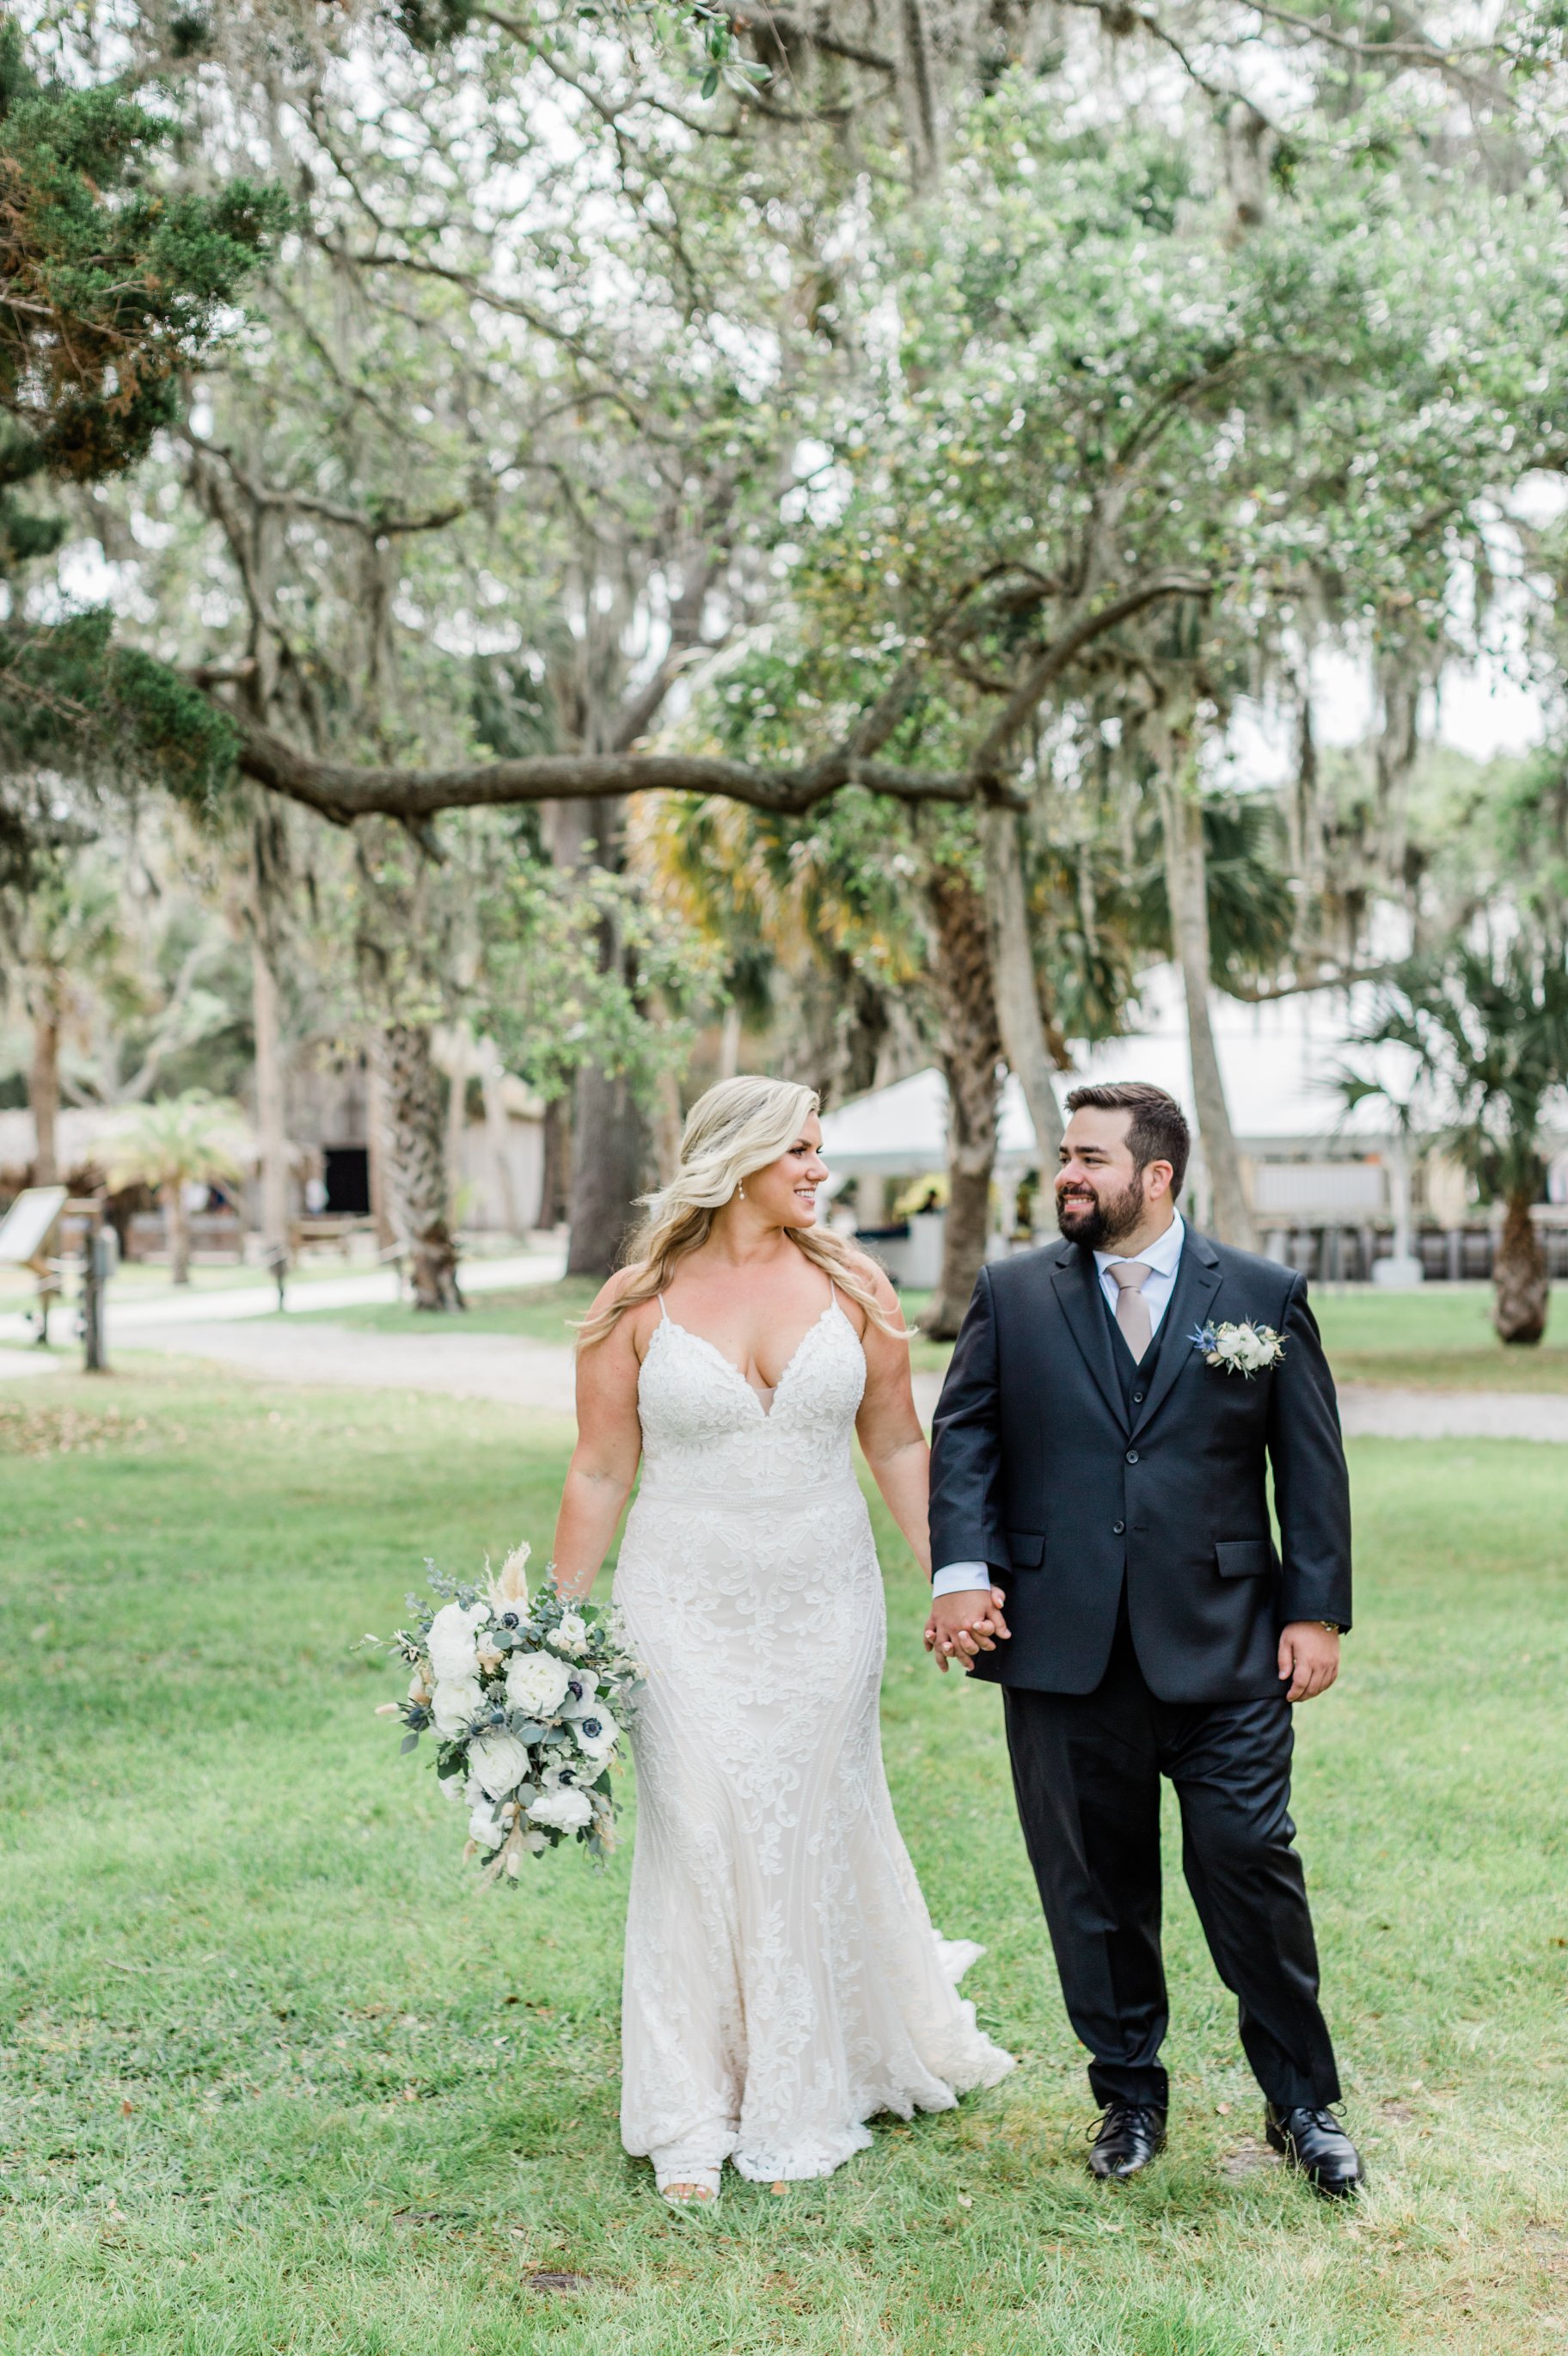 ivory-and-beau-bride-lindsey-pictured-in-sexy-romantic-fitted-lace-wedding-dress-named-cambrie-by-sottero-and-midgley-purchased-from-savannah-bridal-shop-ivory-and-beau-1.jpg